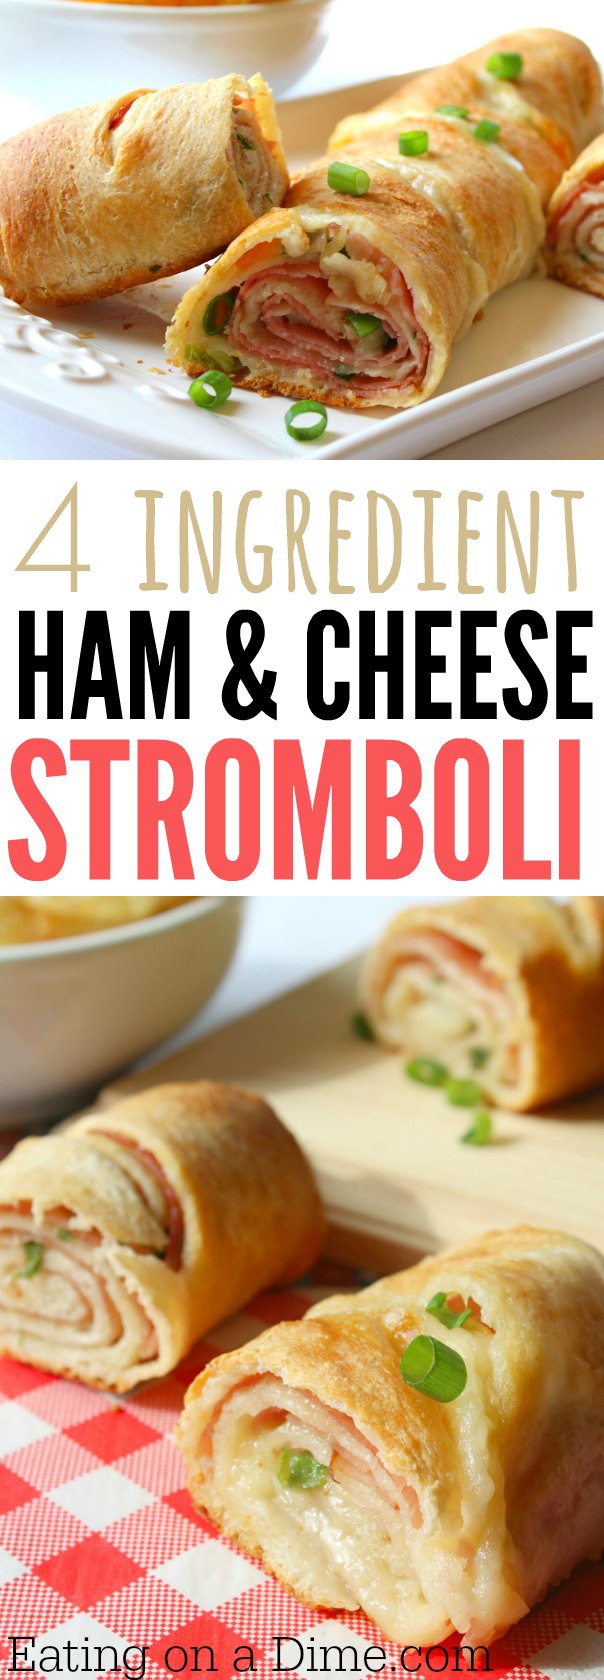 This Easy Stromboli Recipe will become an instant hit with your family! Perfect for busy nights and versatile enough that you can keep changing it up!